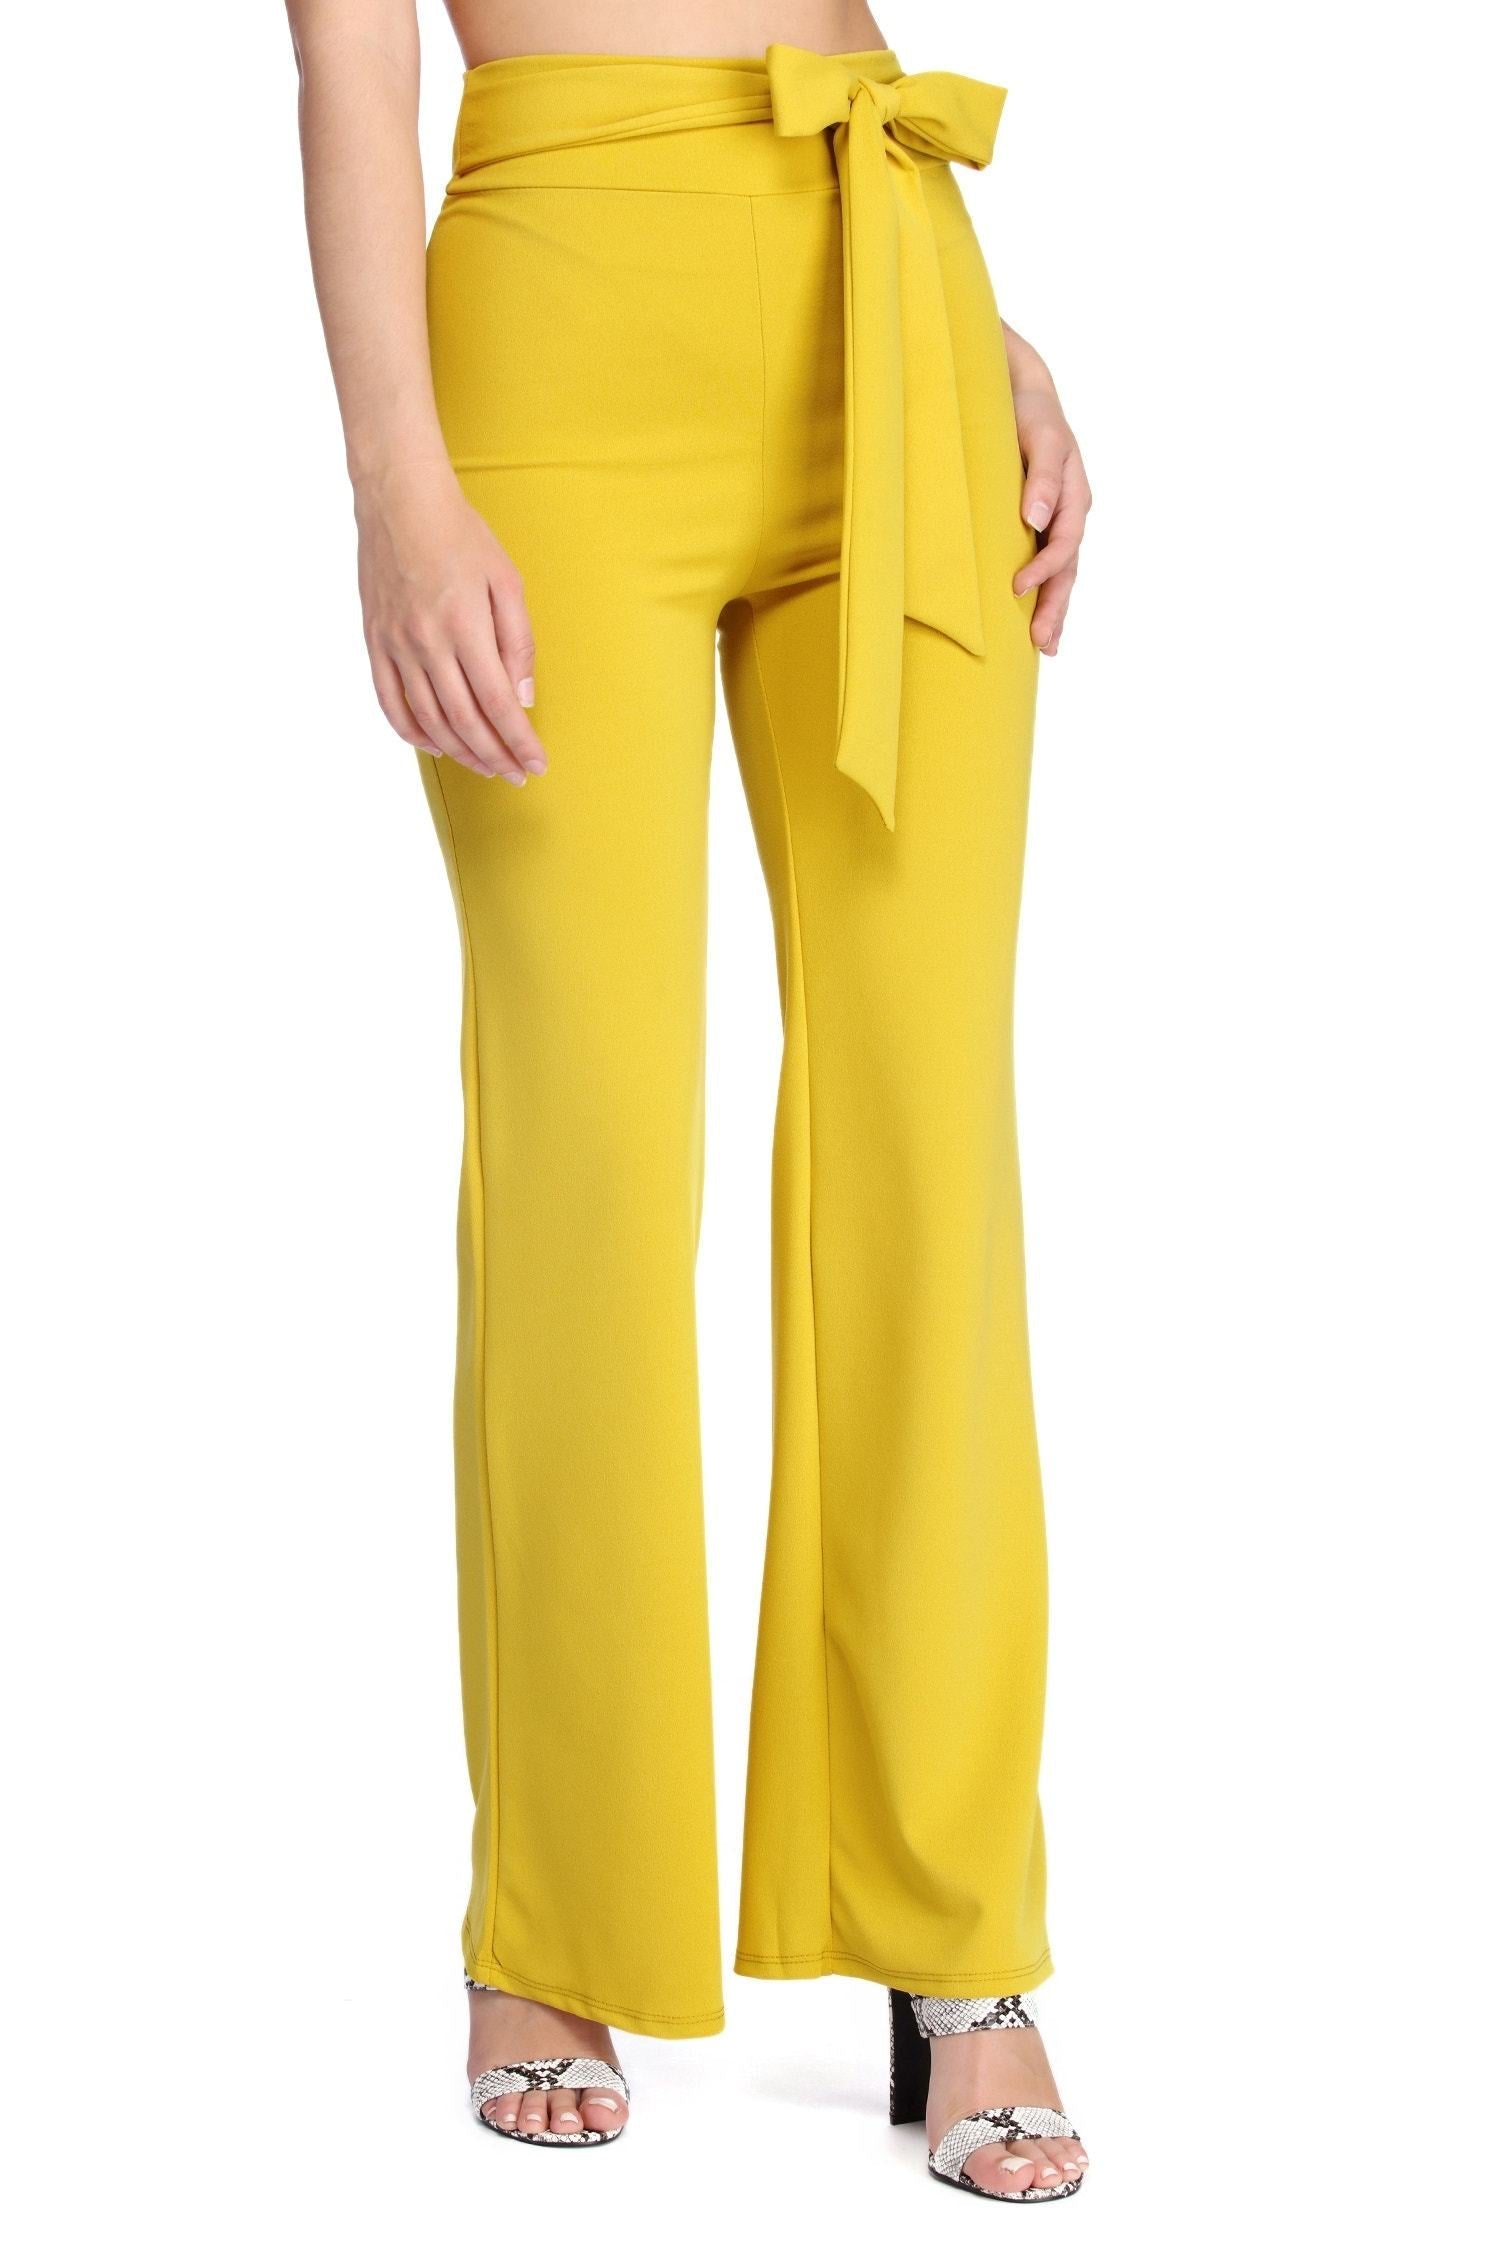 Sealed With Style Tie-Waist Pants - Lady Occasions